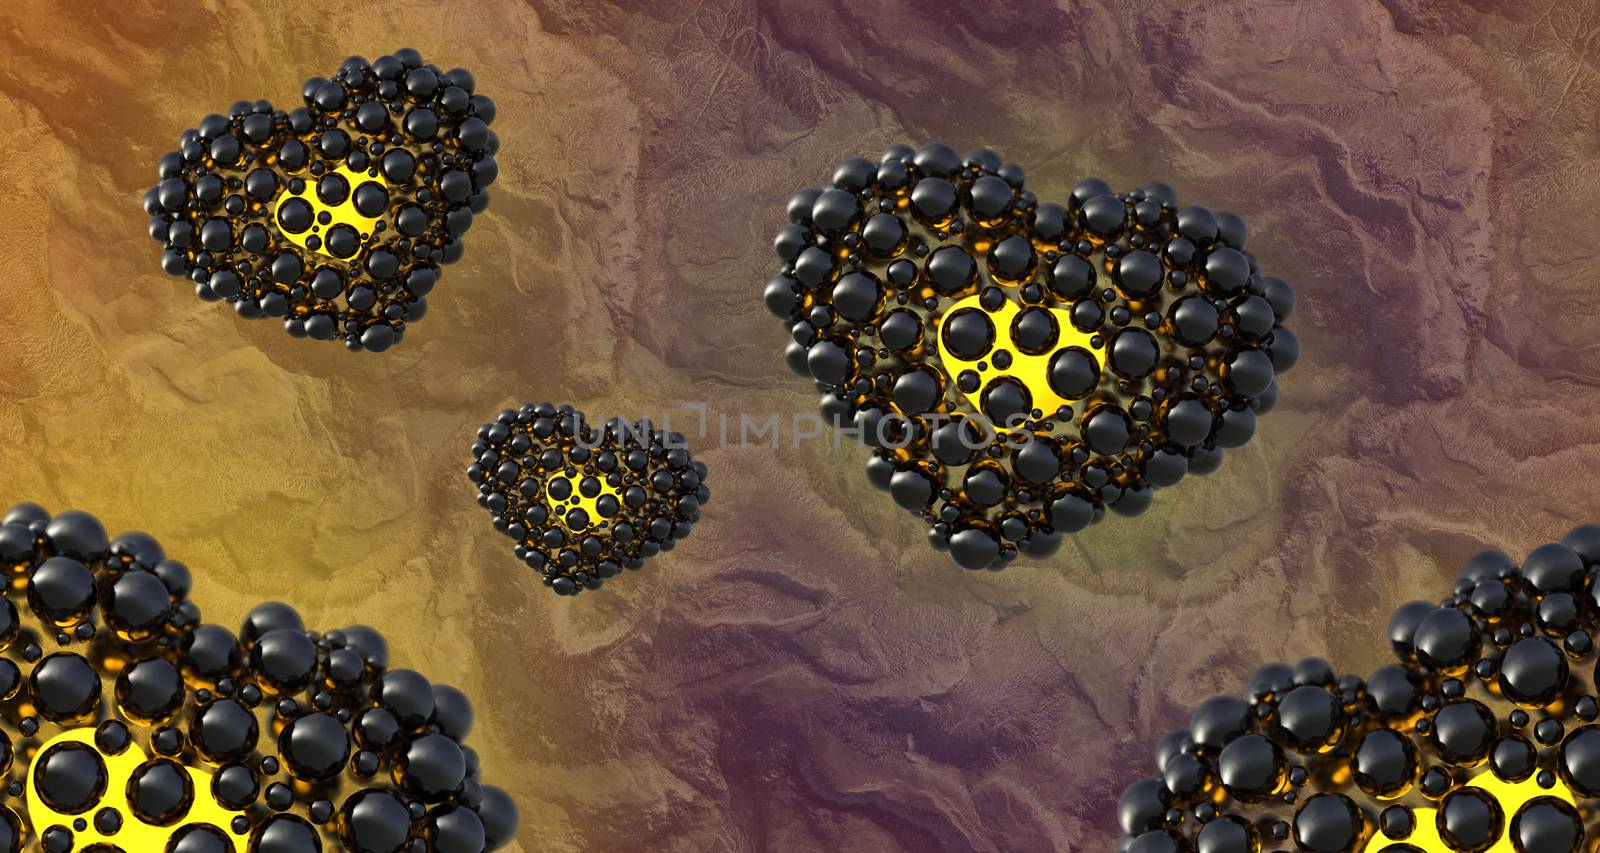 black hearts made of spheres with reflections and flying over mountain bacground. Happy valentines day 3d illustration.